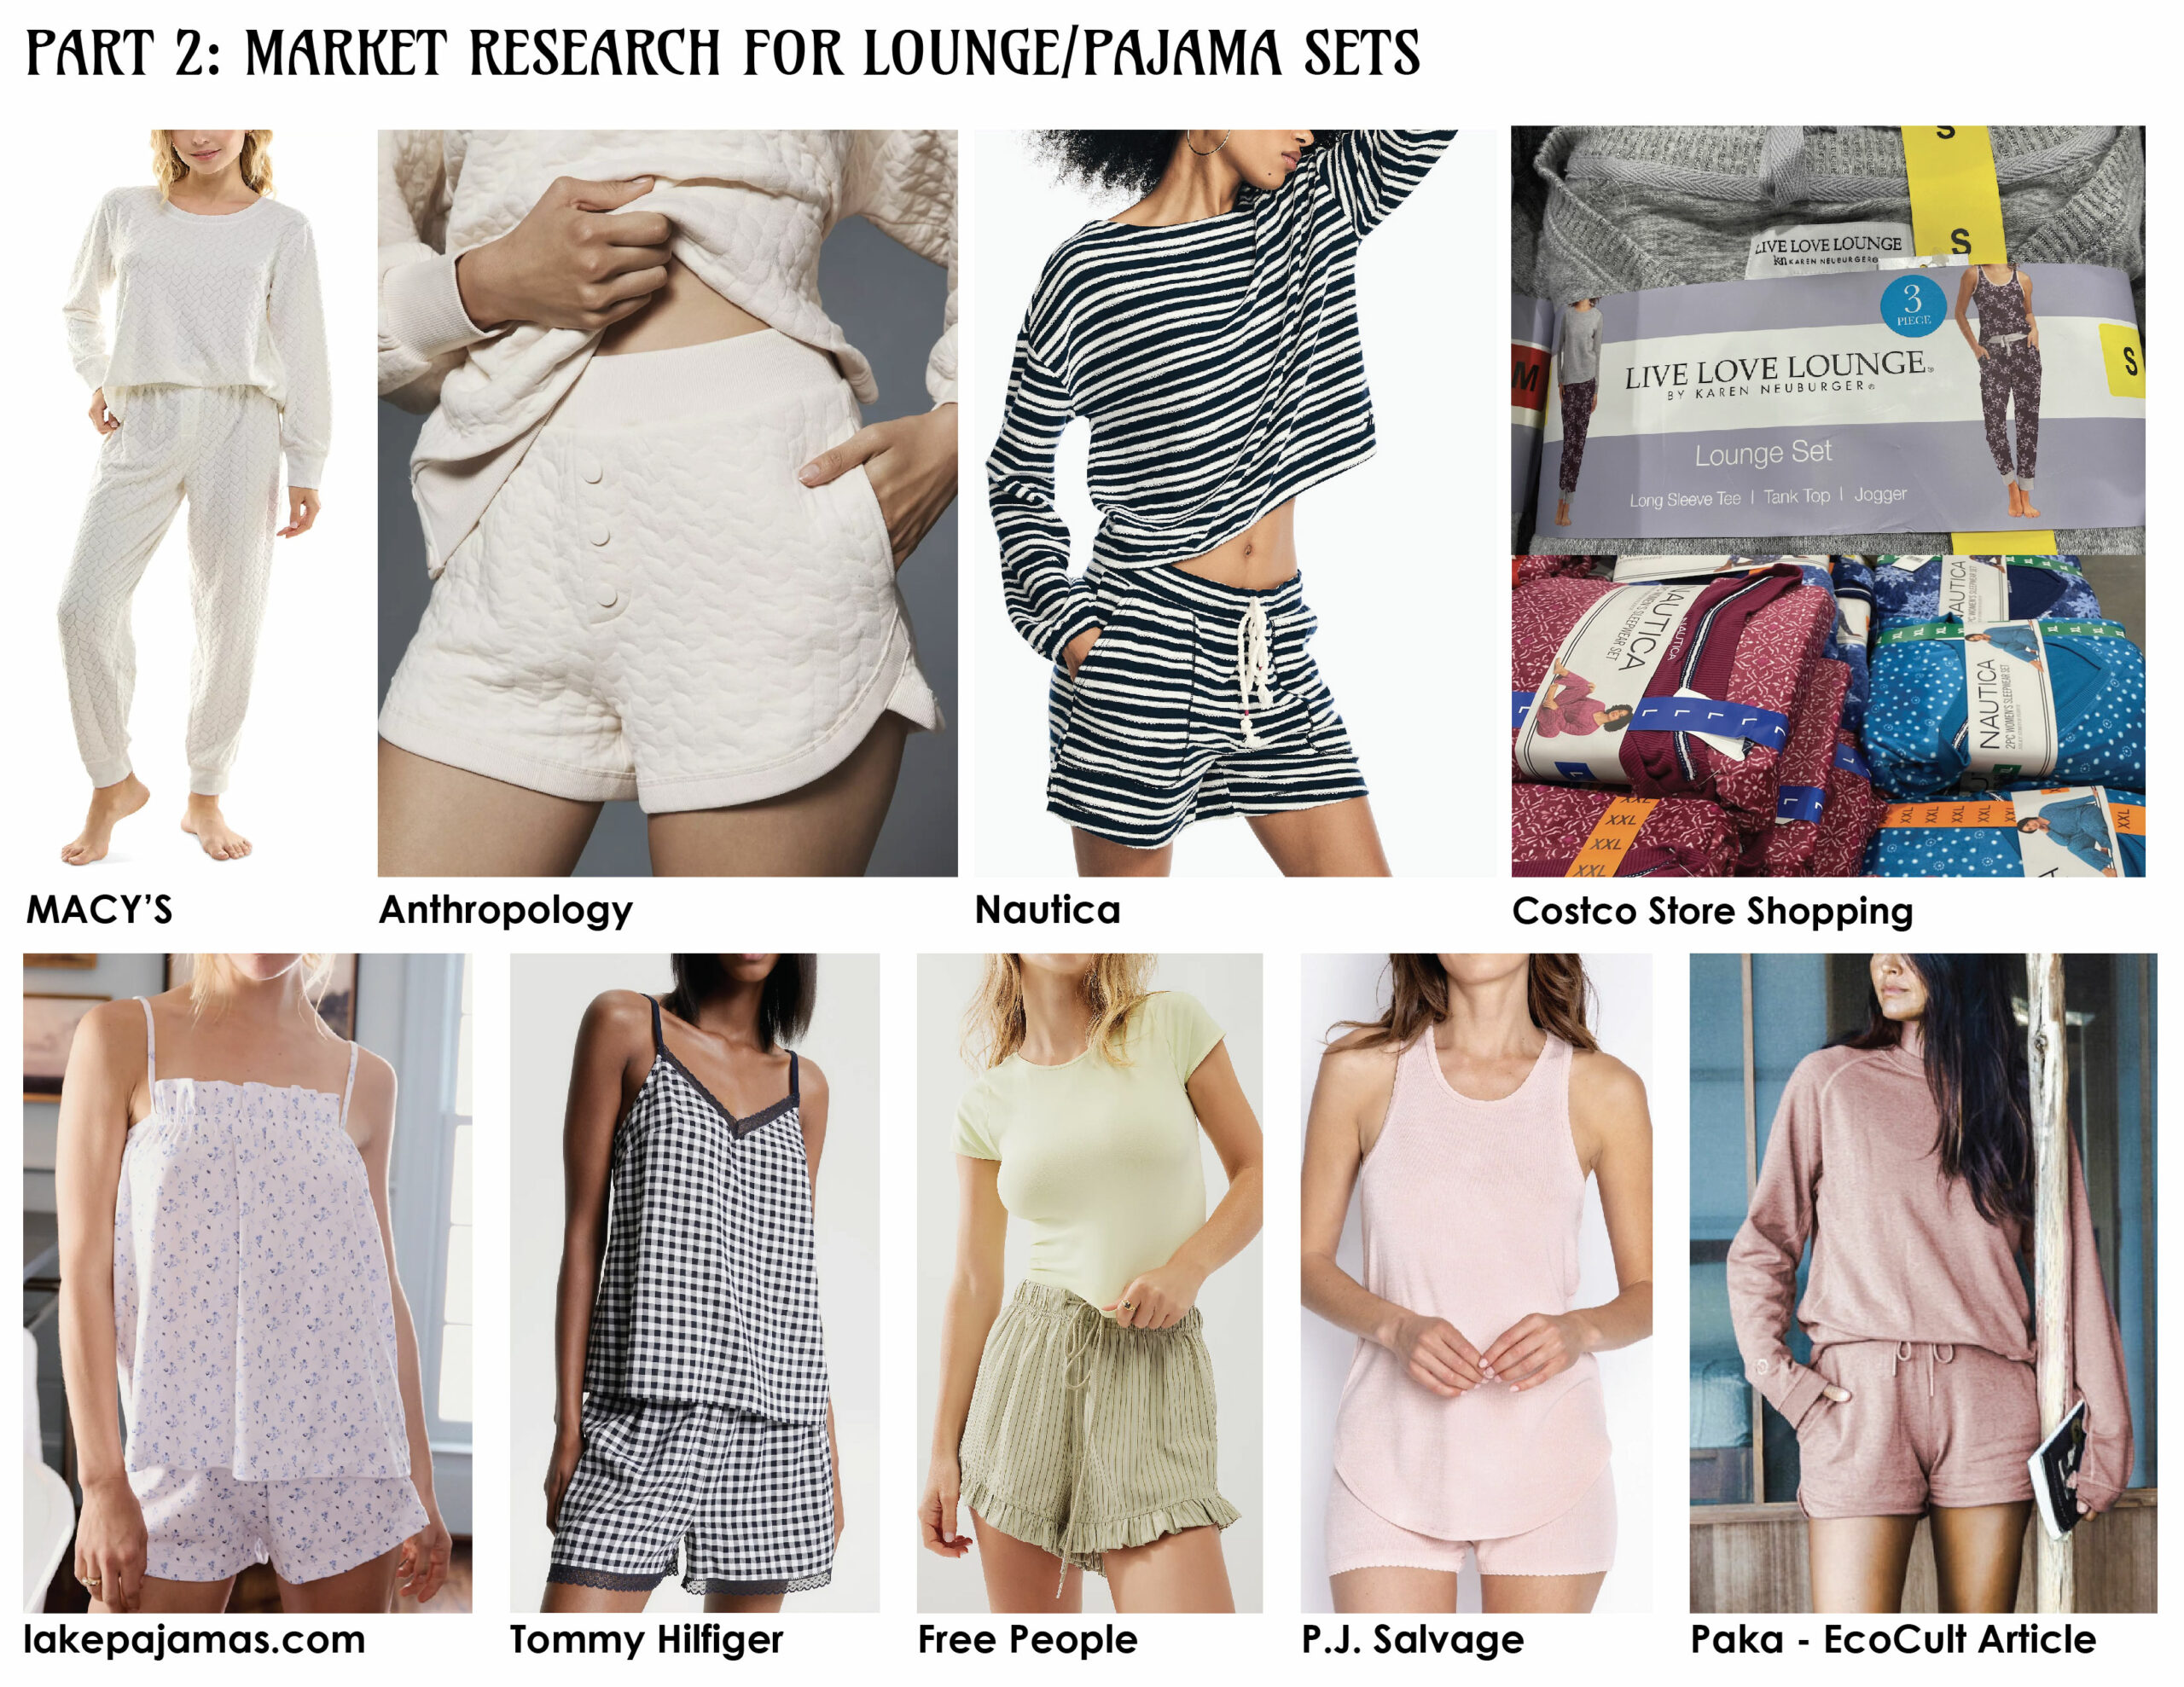 Market research on what competitors are producing in the loungewear category